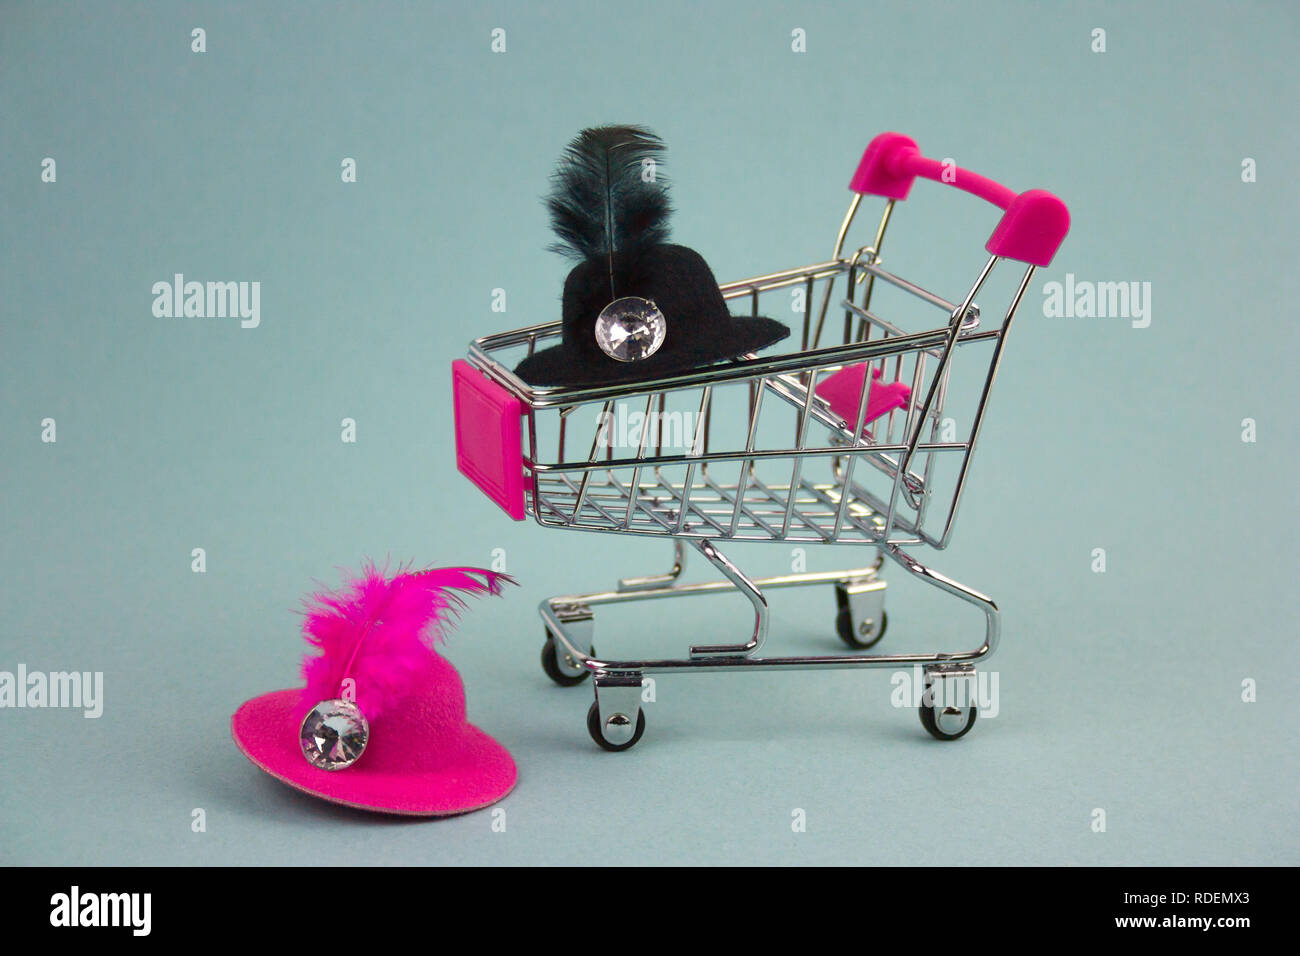 shopping cart with pink and black hats Stock Photo